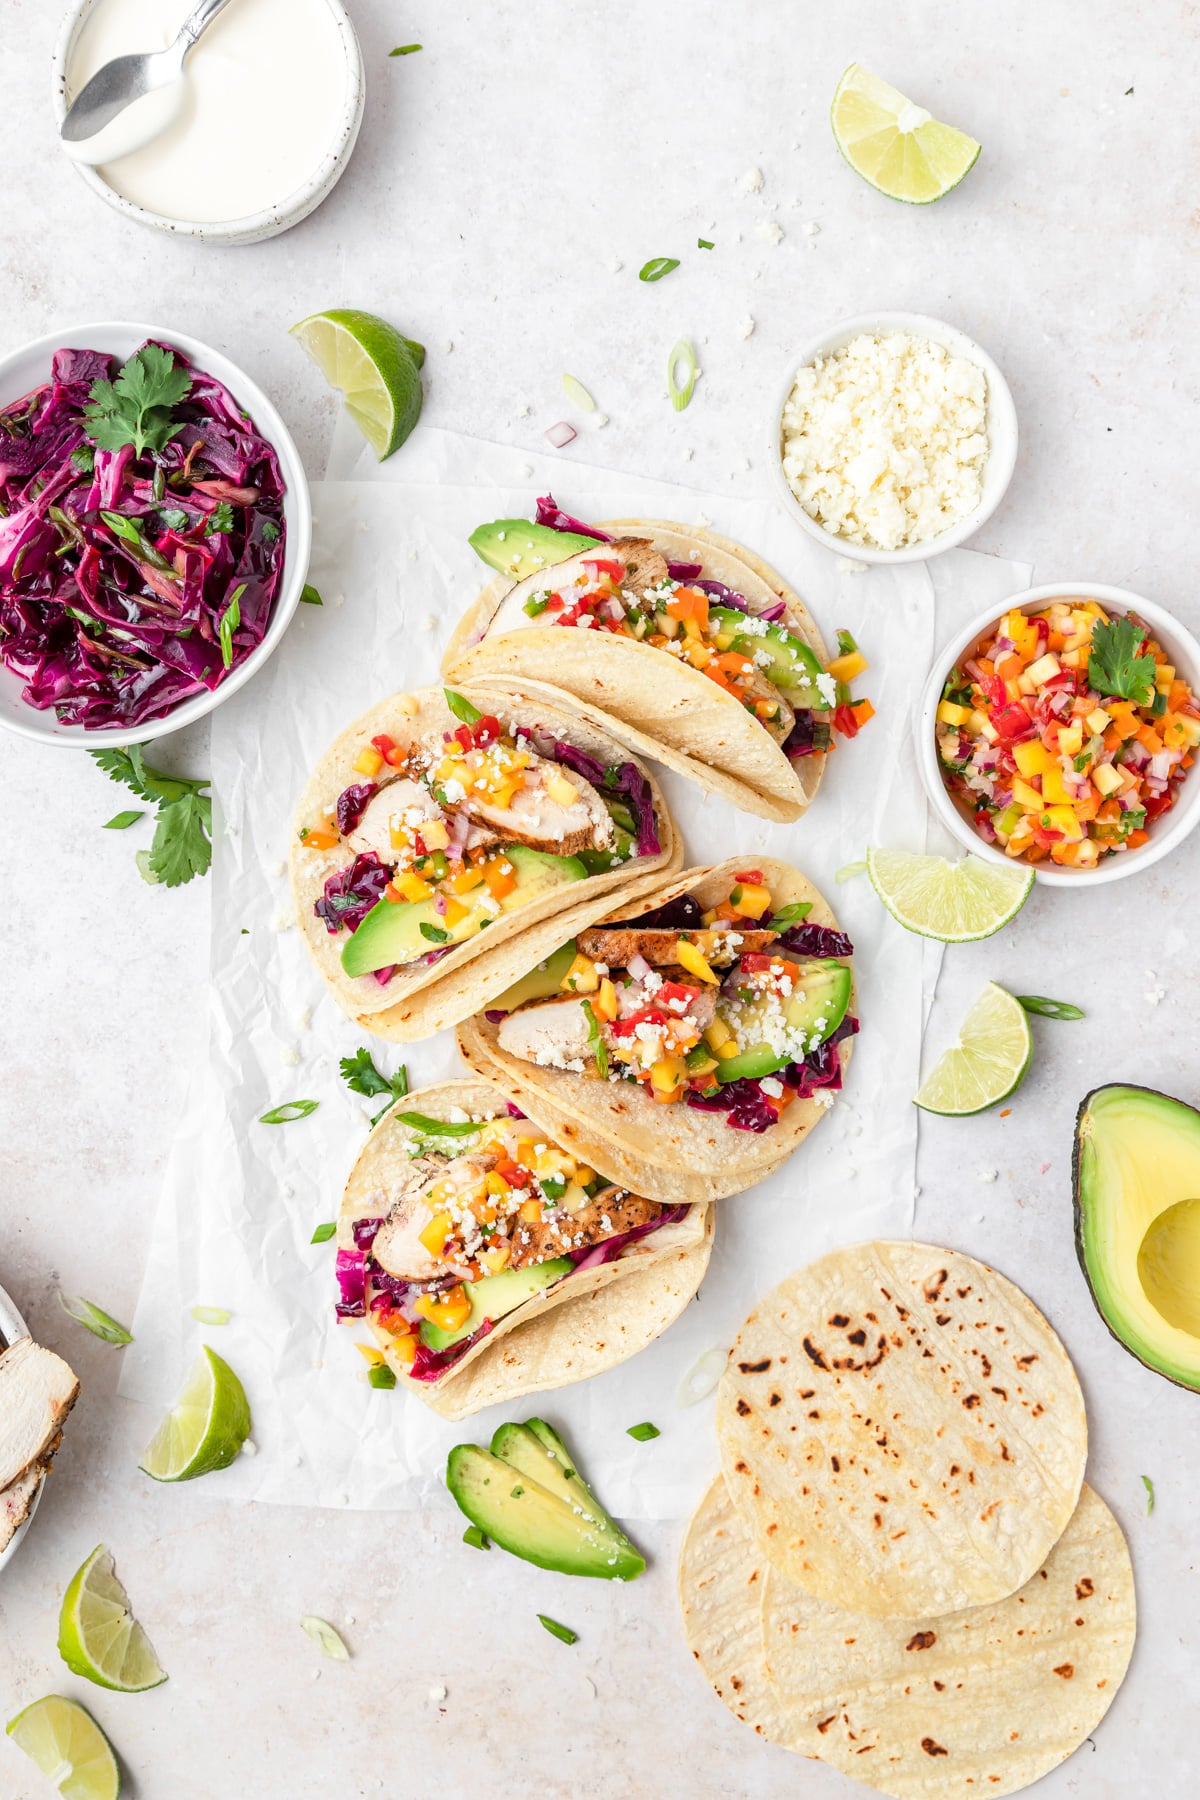 grilled chicken tacos on plate with cabbage slaw and mango salsa.